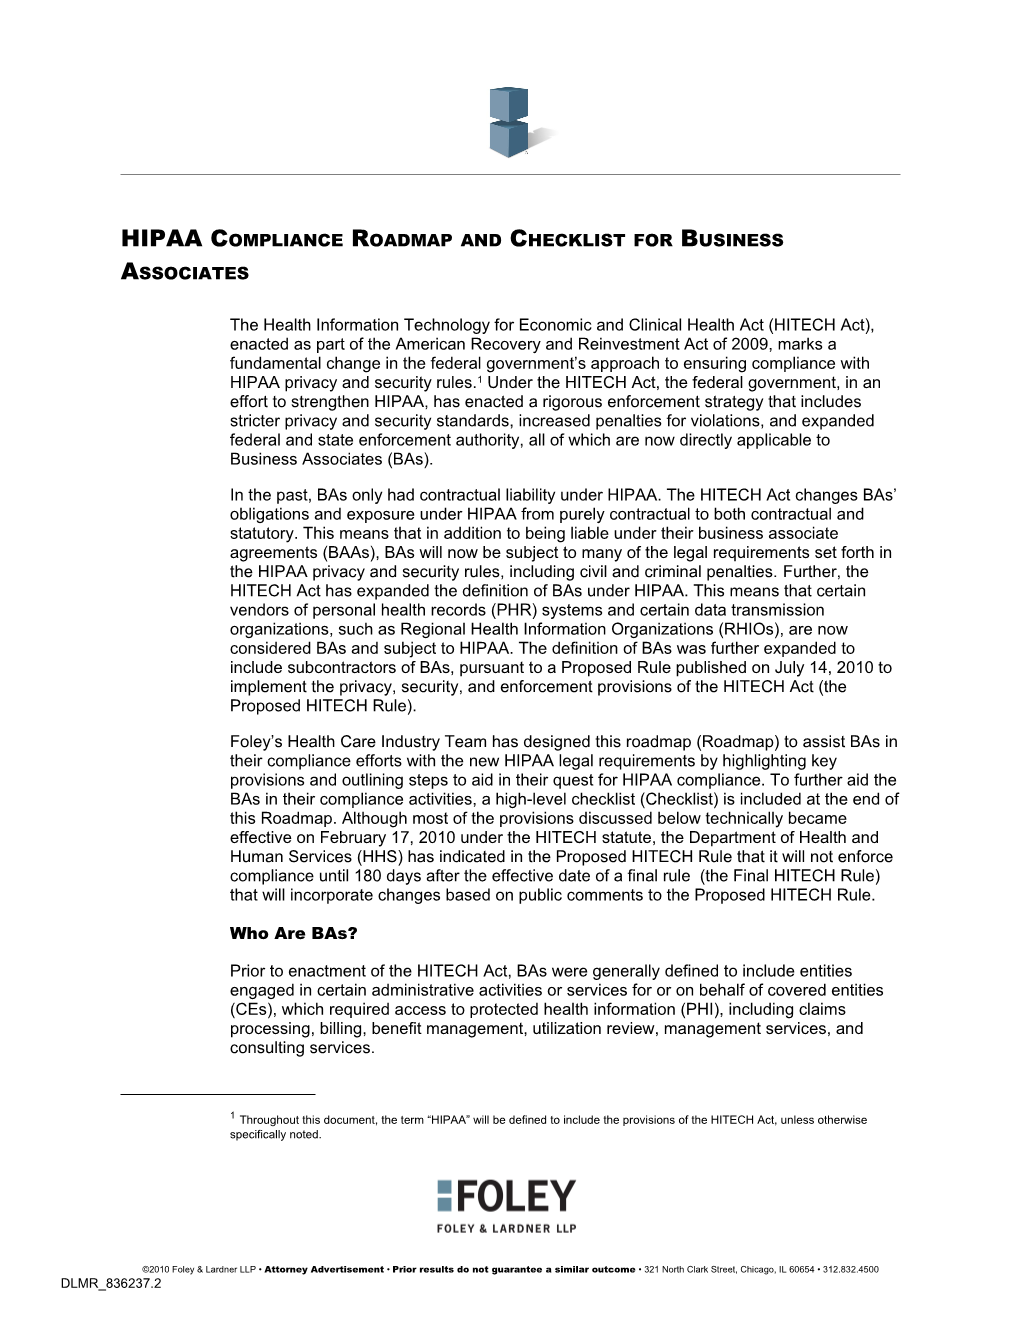 HIPAA Compliance Roadmap and Checklist for Business Associates